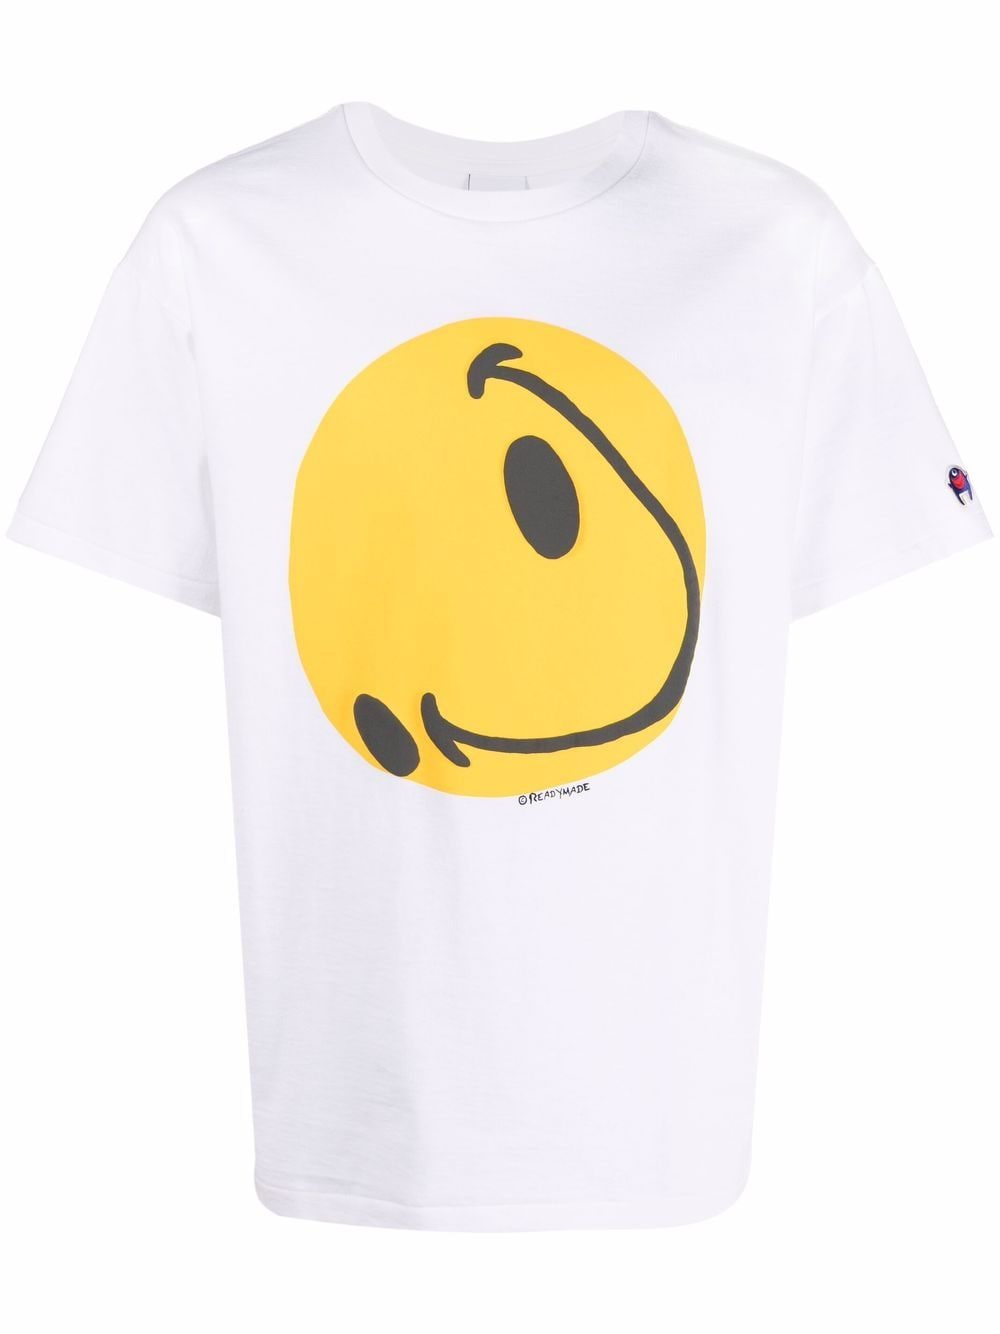 Readymade Collapse Face T-shirt - White von Readymade